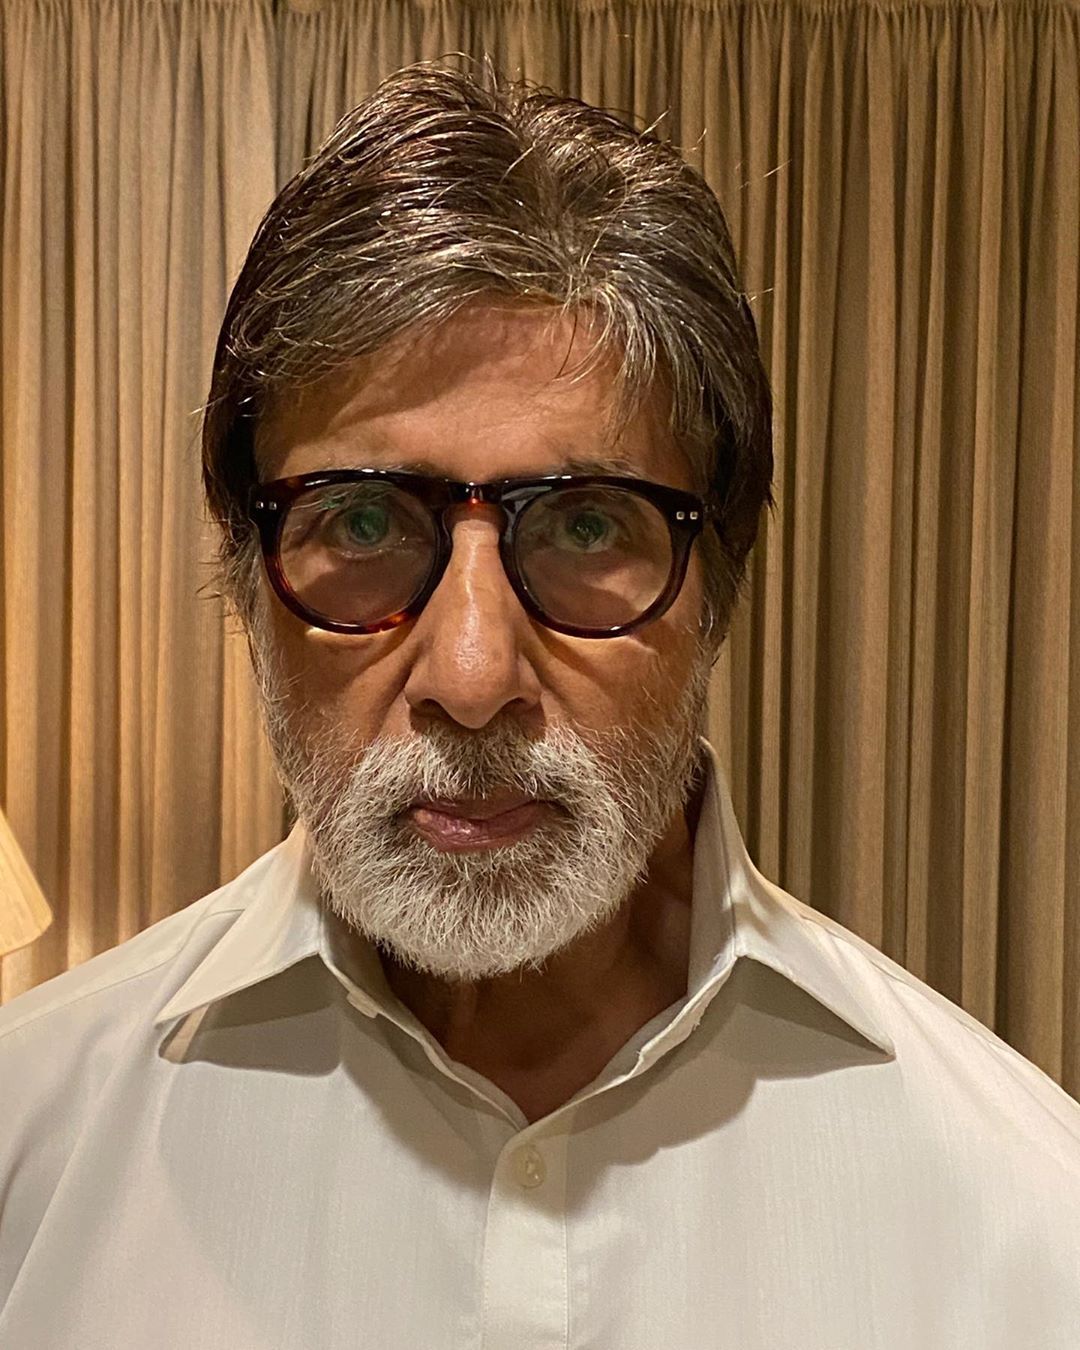 Amitabh Bachchan Warns Troll Wishing For His Death Against The Wrath Of His Fans Writes, 'May You Burn In Your Own Stew'